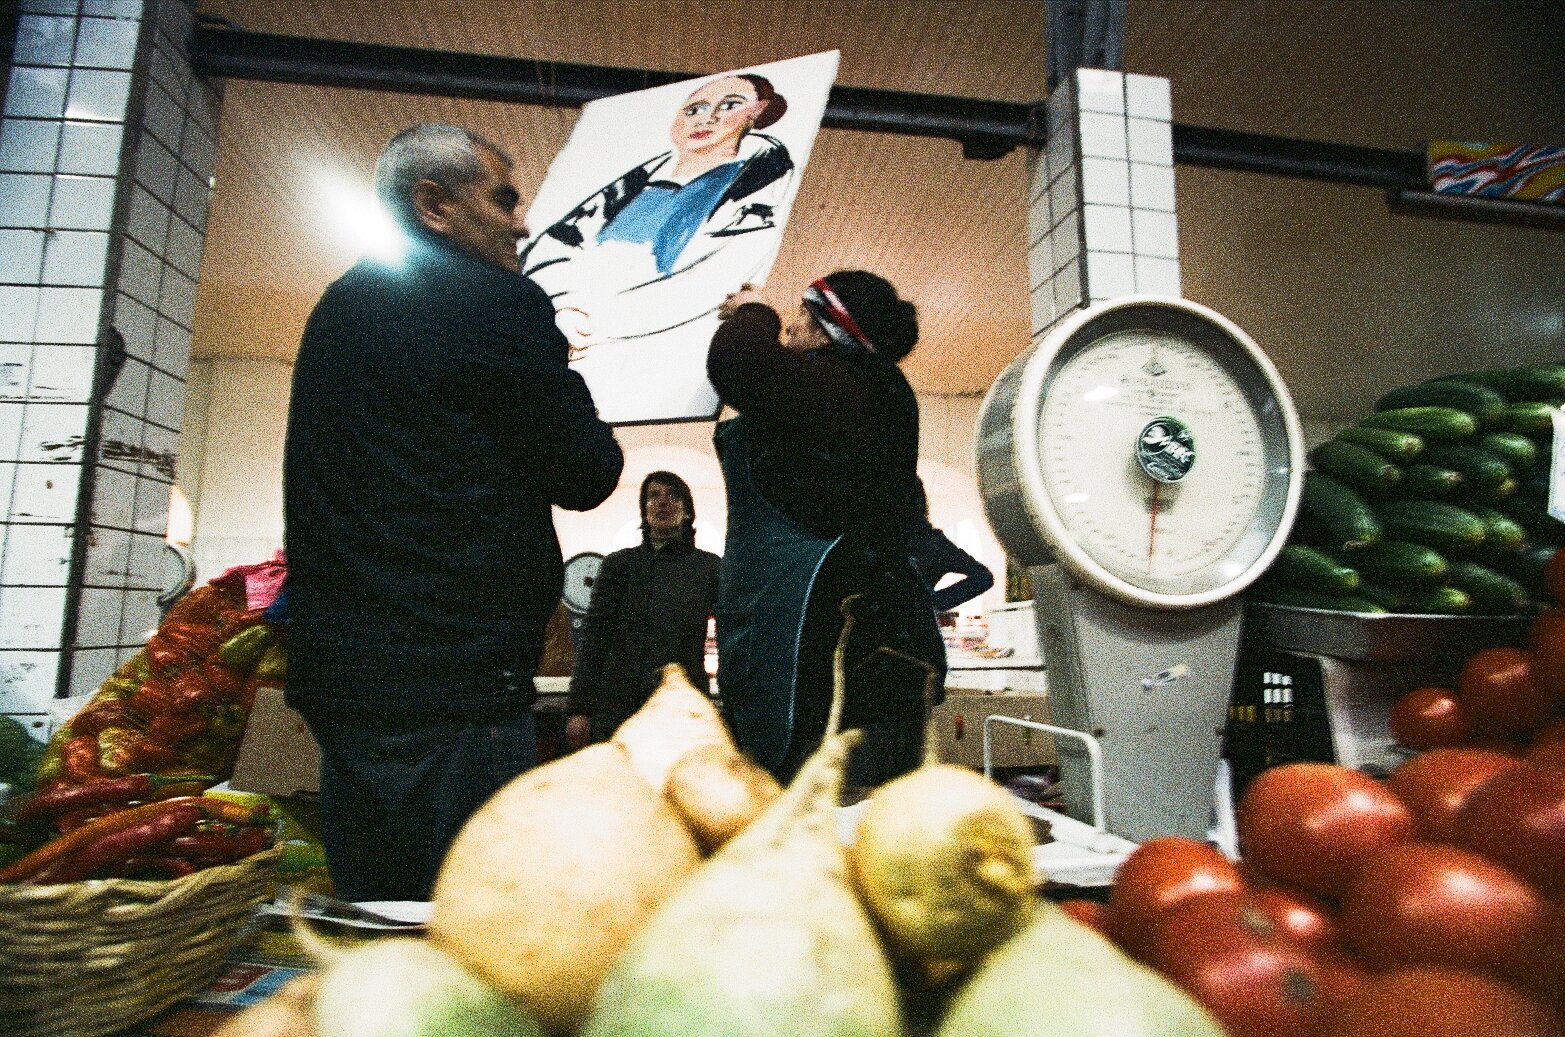 From the At the Market series. Photo: Solmaz Guseinova. Golant wanted to exhibit her work at the market where her subjects worked